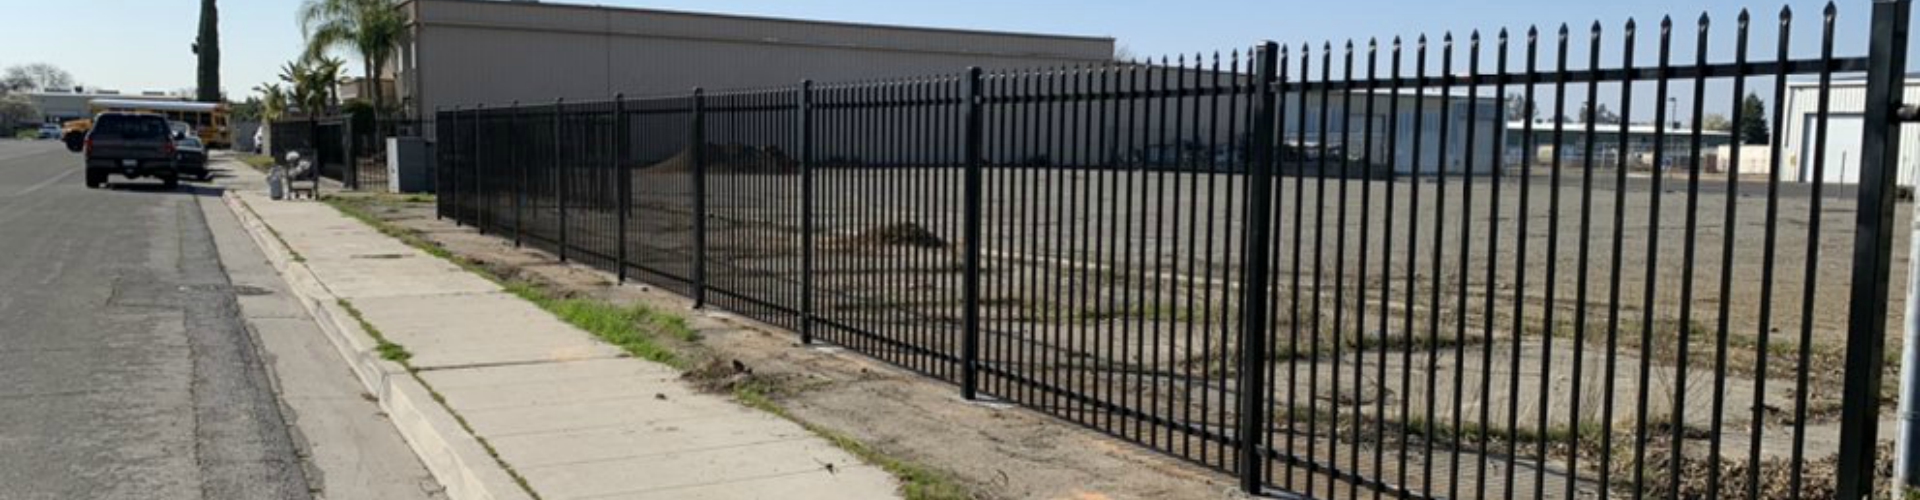 Top Choice Fencing, Inc - Commercial